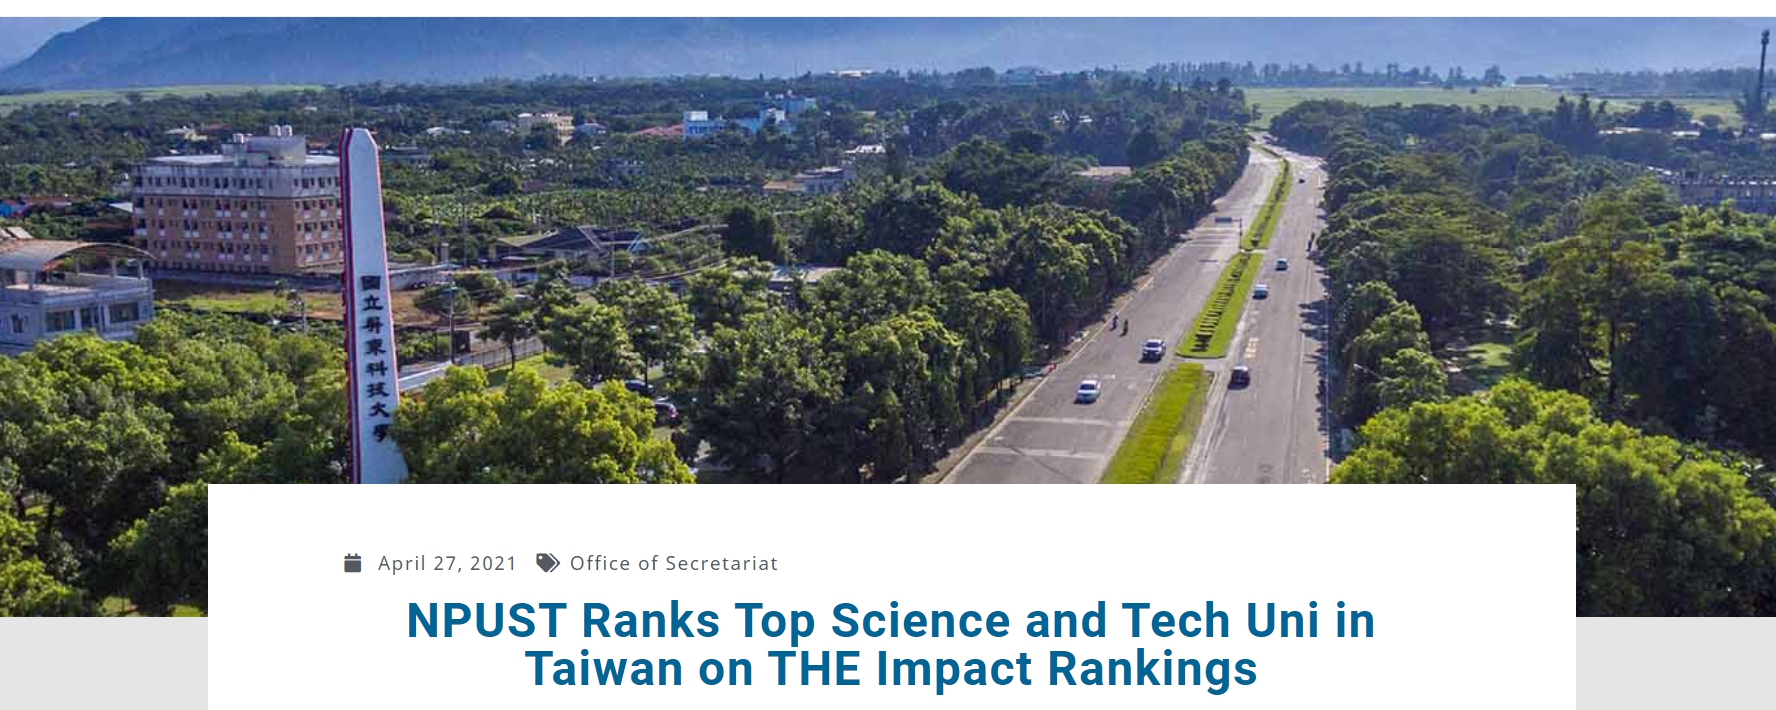 [2021.5.5] NPUST Ranks Top Science and Tech Uni in Taiwan on THE Impact Rankings